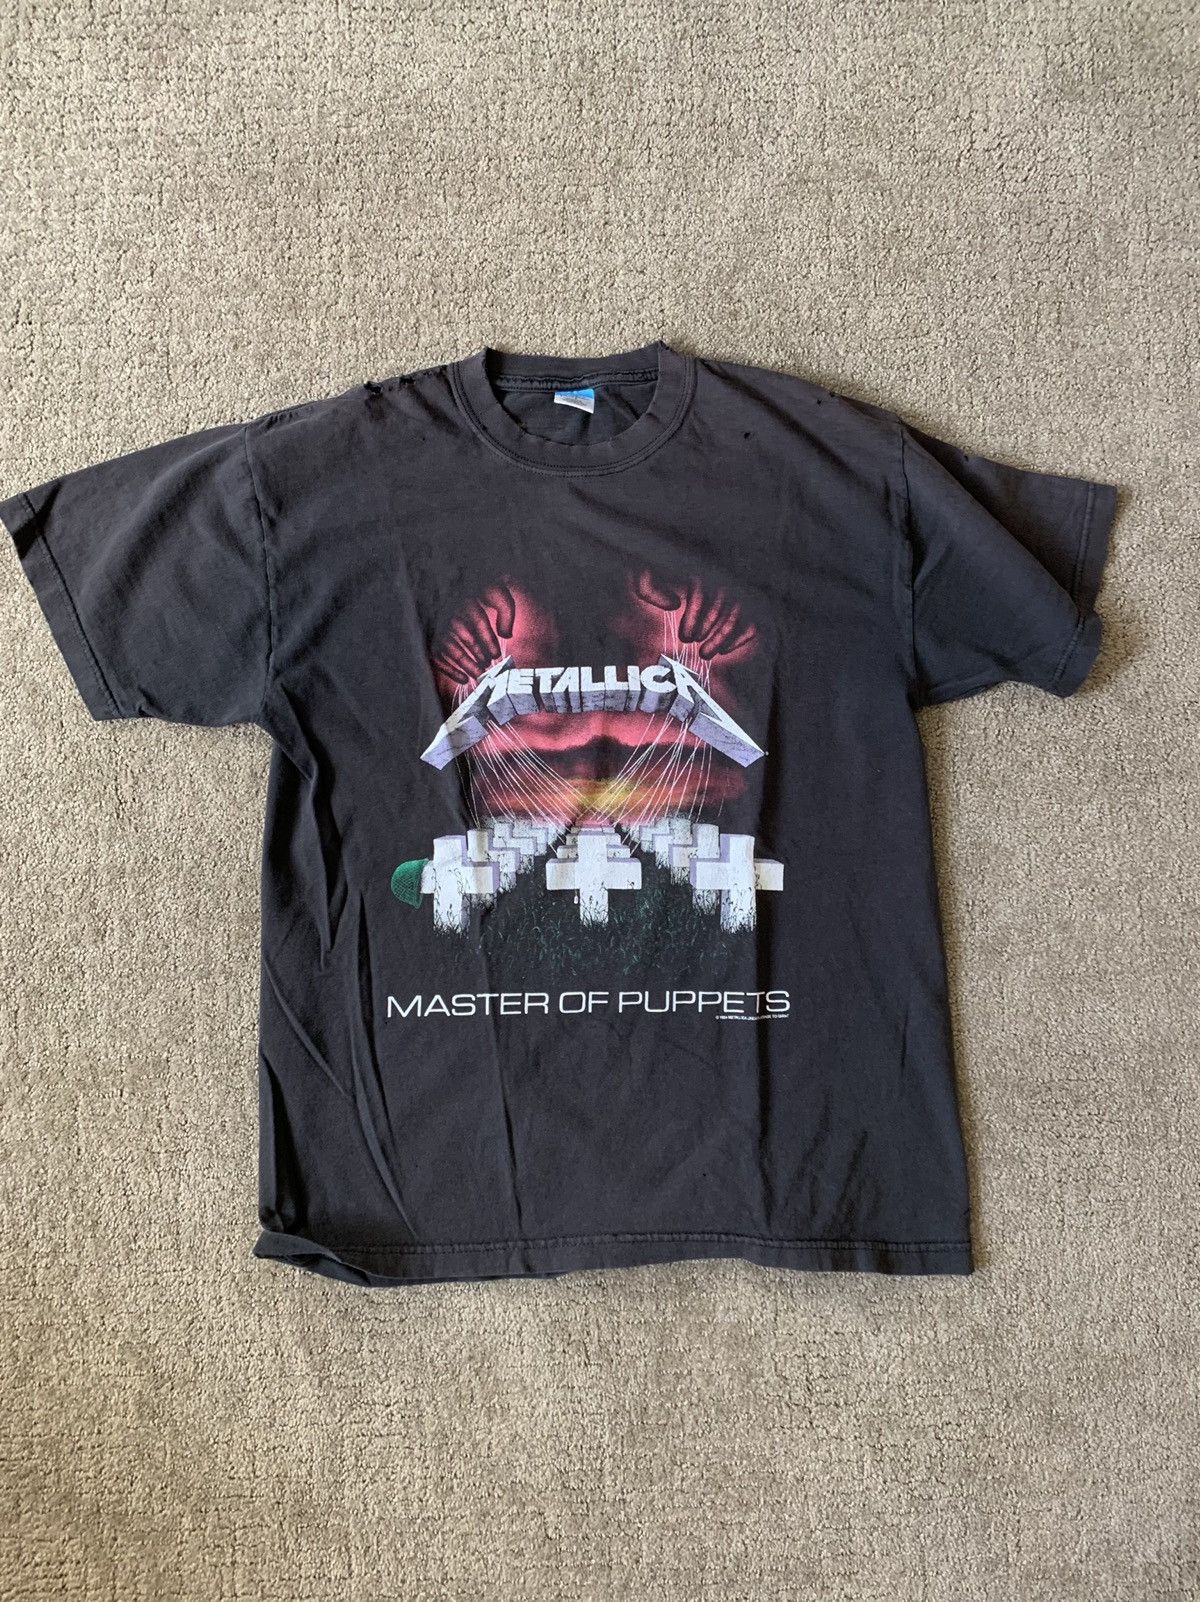 Vintage Vintage Metallica Master of Puppets Tee Size US L / EU 52-54 / 3 - 1 Preview